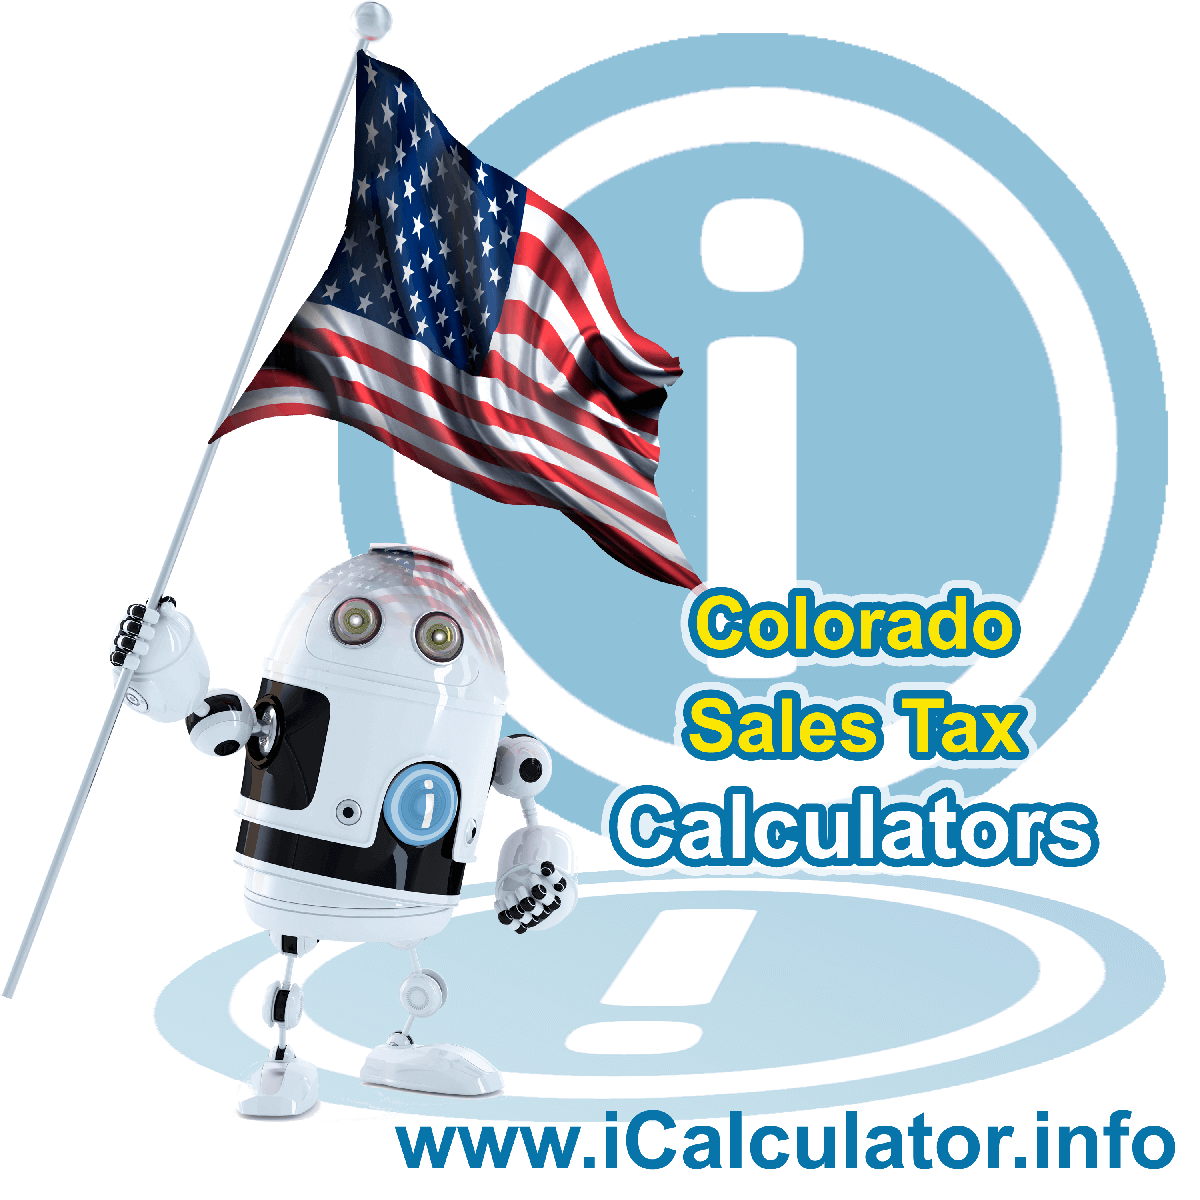 Parachute Sales Rates: This image illustrates a calculator robot calculating Parachute sales tax manually using the Parachute Sales Tax Formula. You can use this information to calculate Parachute Sales Tax manually or use the Parachute Sales Tax Calculator to calculate sales tax online.